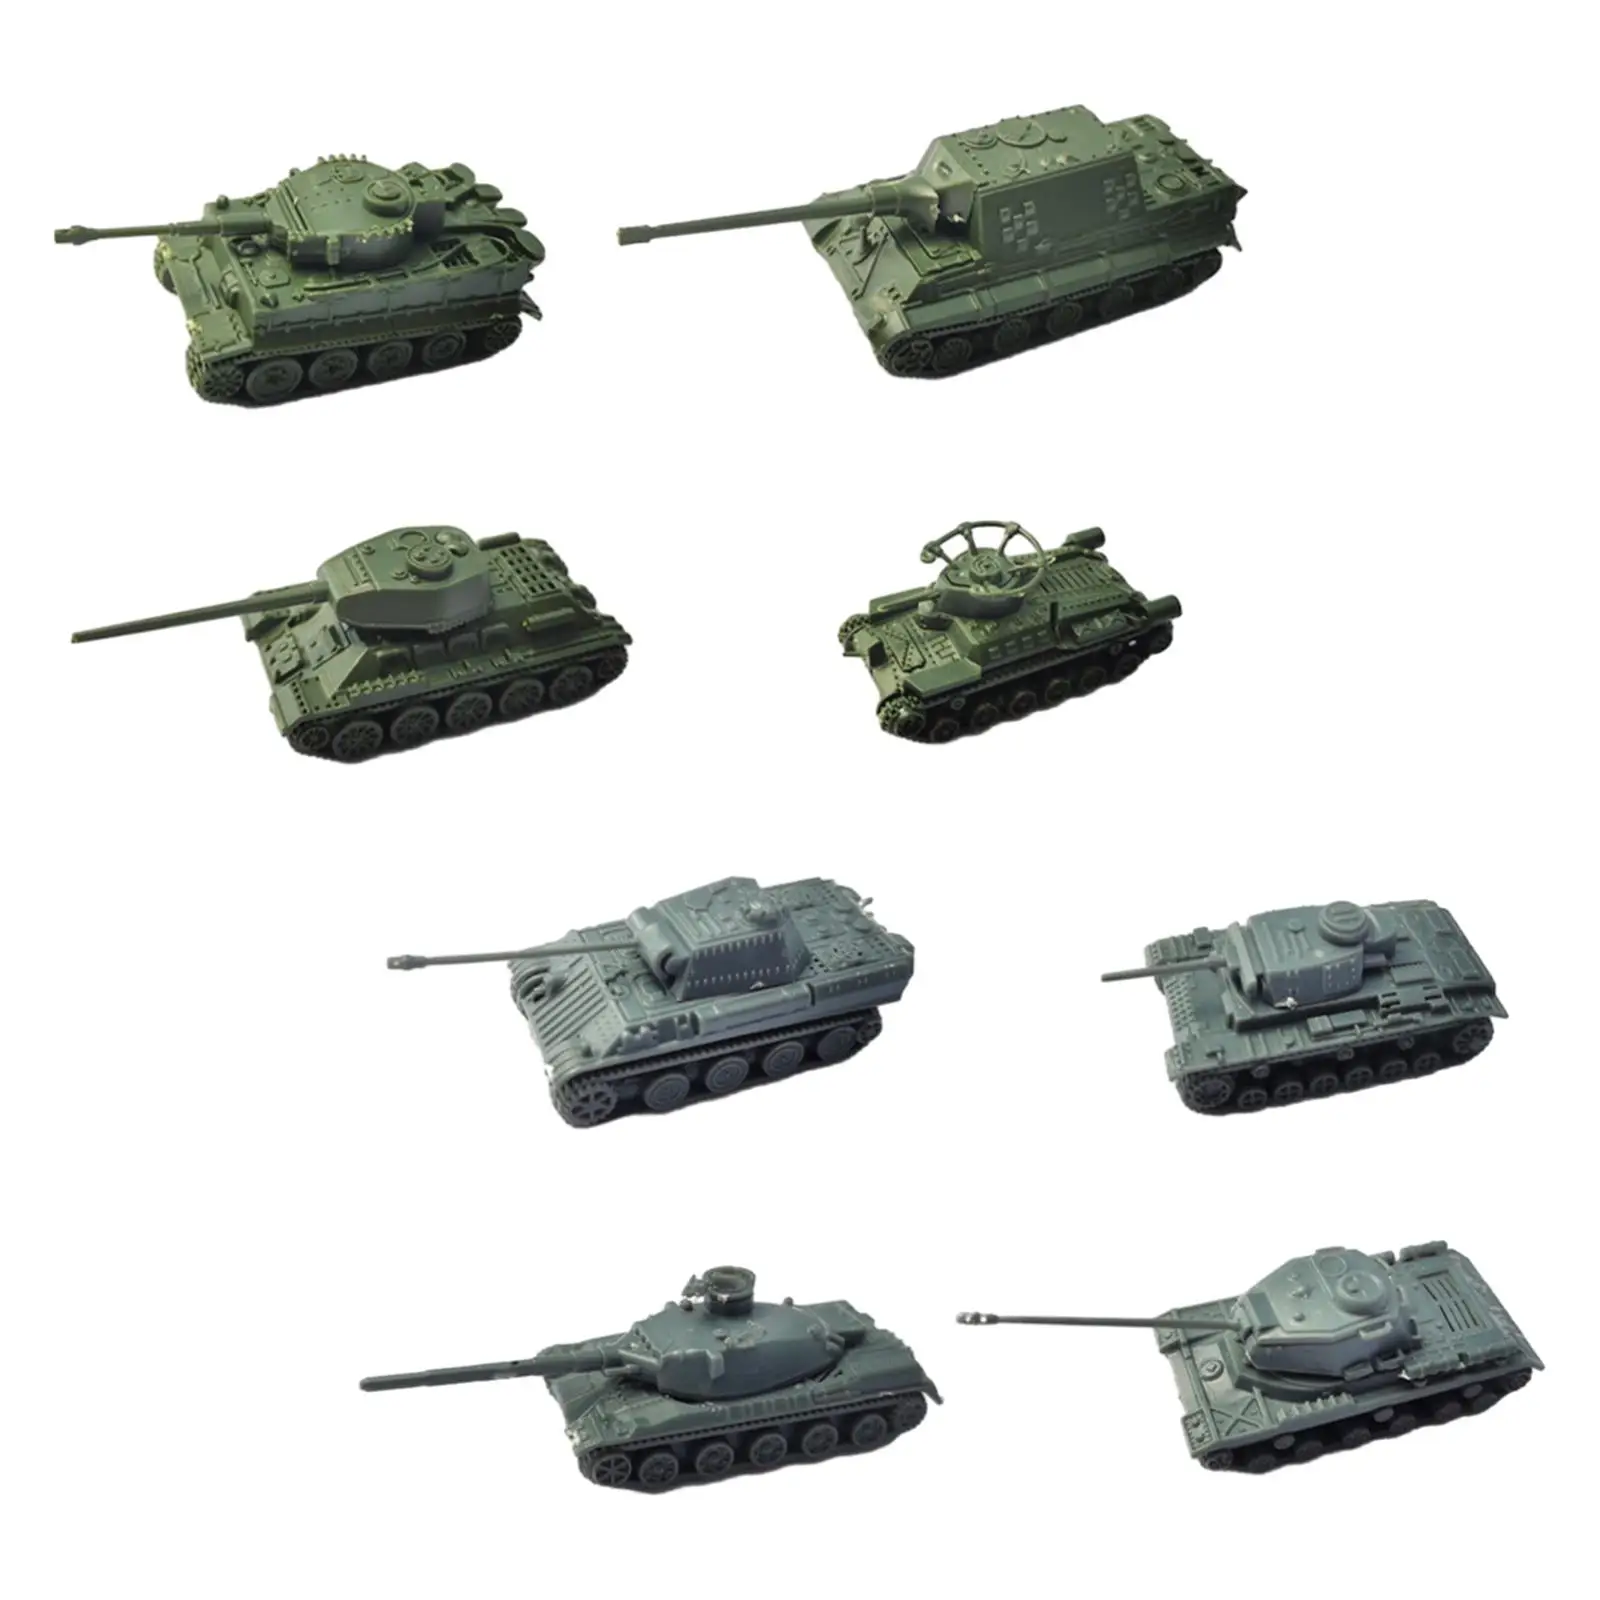 8x 1/144 Tank Model T34/85 Education Toy DIY Puzzle Building Projects 4D Modern Tank Model for Toddlers Boy Girl Holiday Gifts